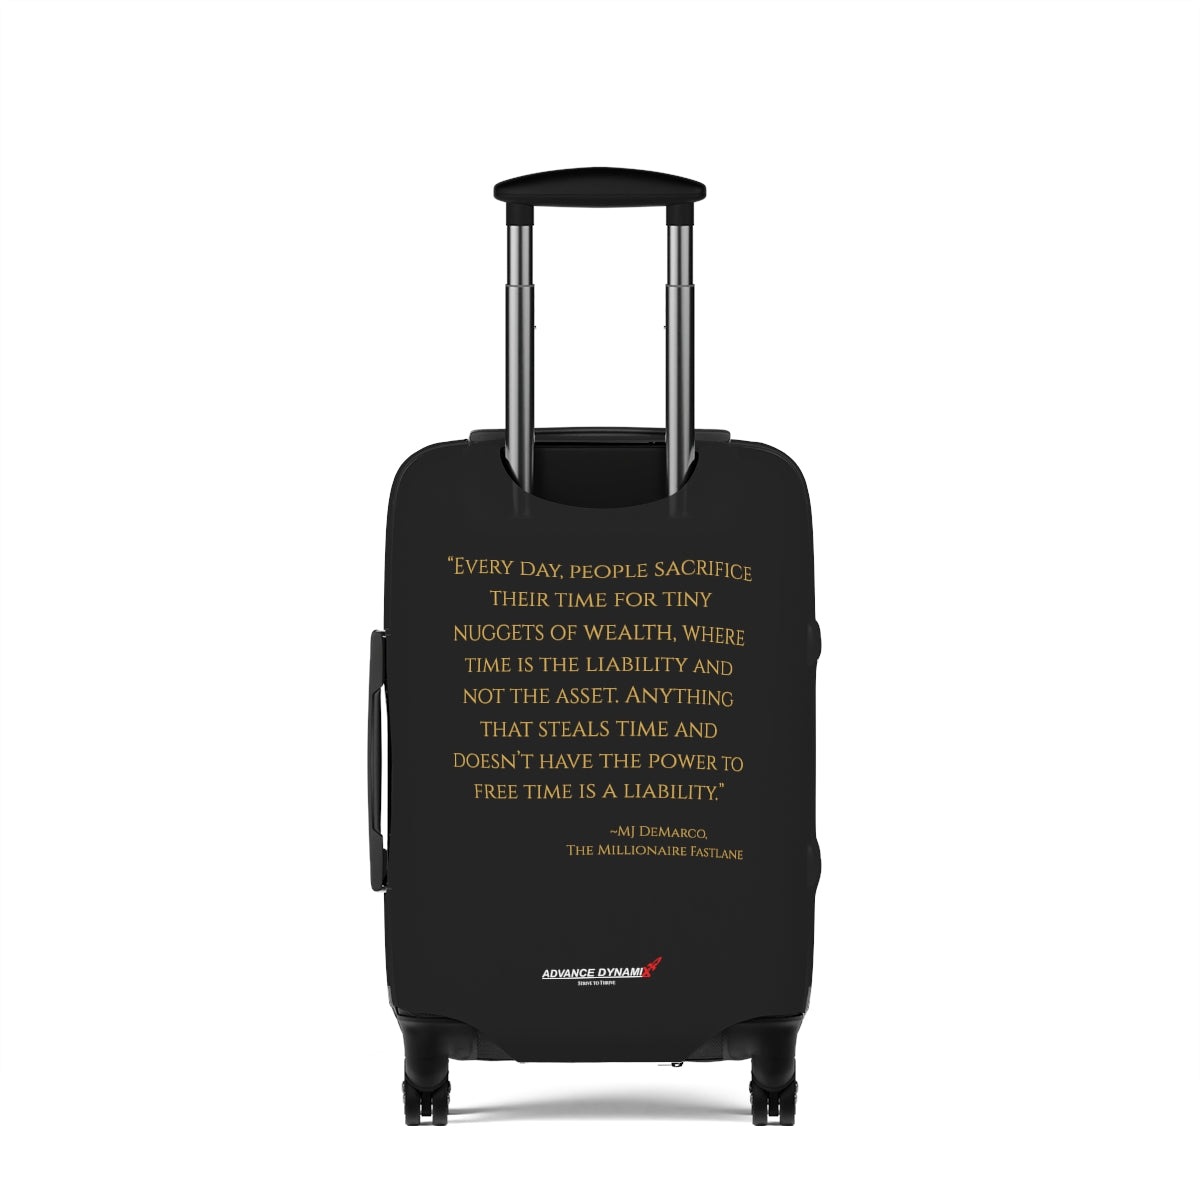 "Every day people sacrifice their time for tiny nuggets of..." ~MJ DeMarco, The Millionaire Fastlane - Luggage Covers Infused with Advance Dynamix Add-A-Tude - Tell the world!